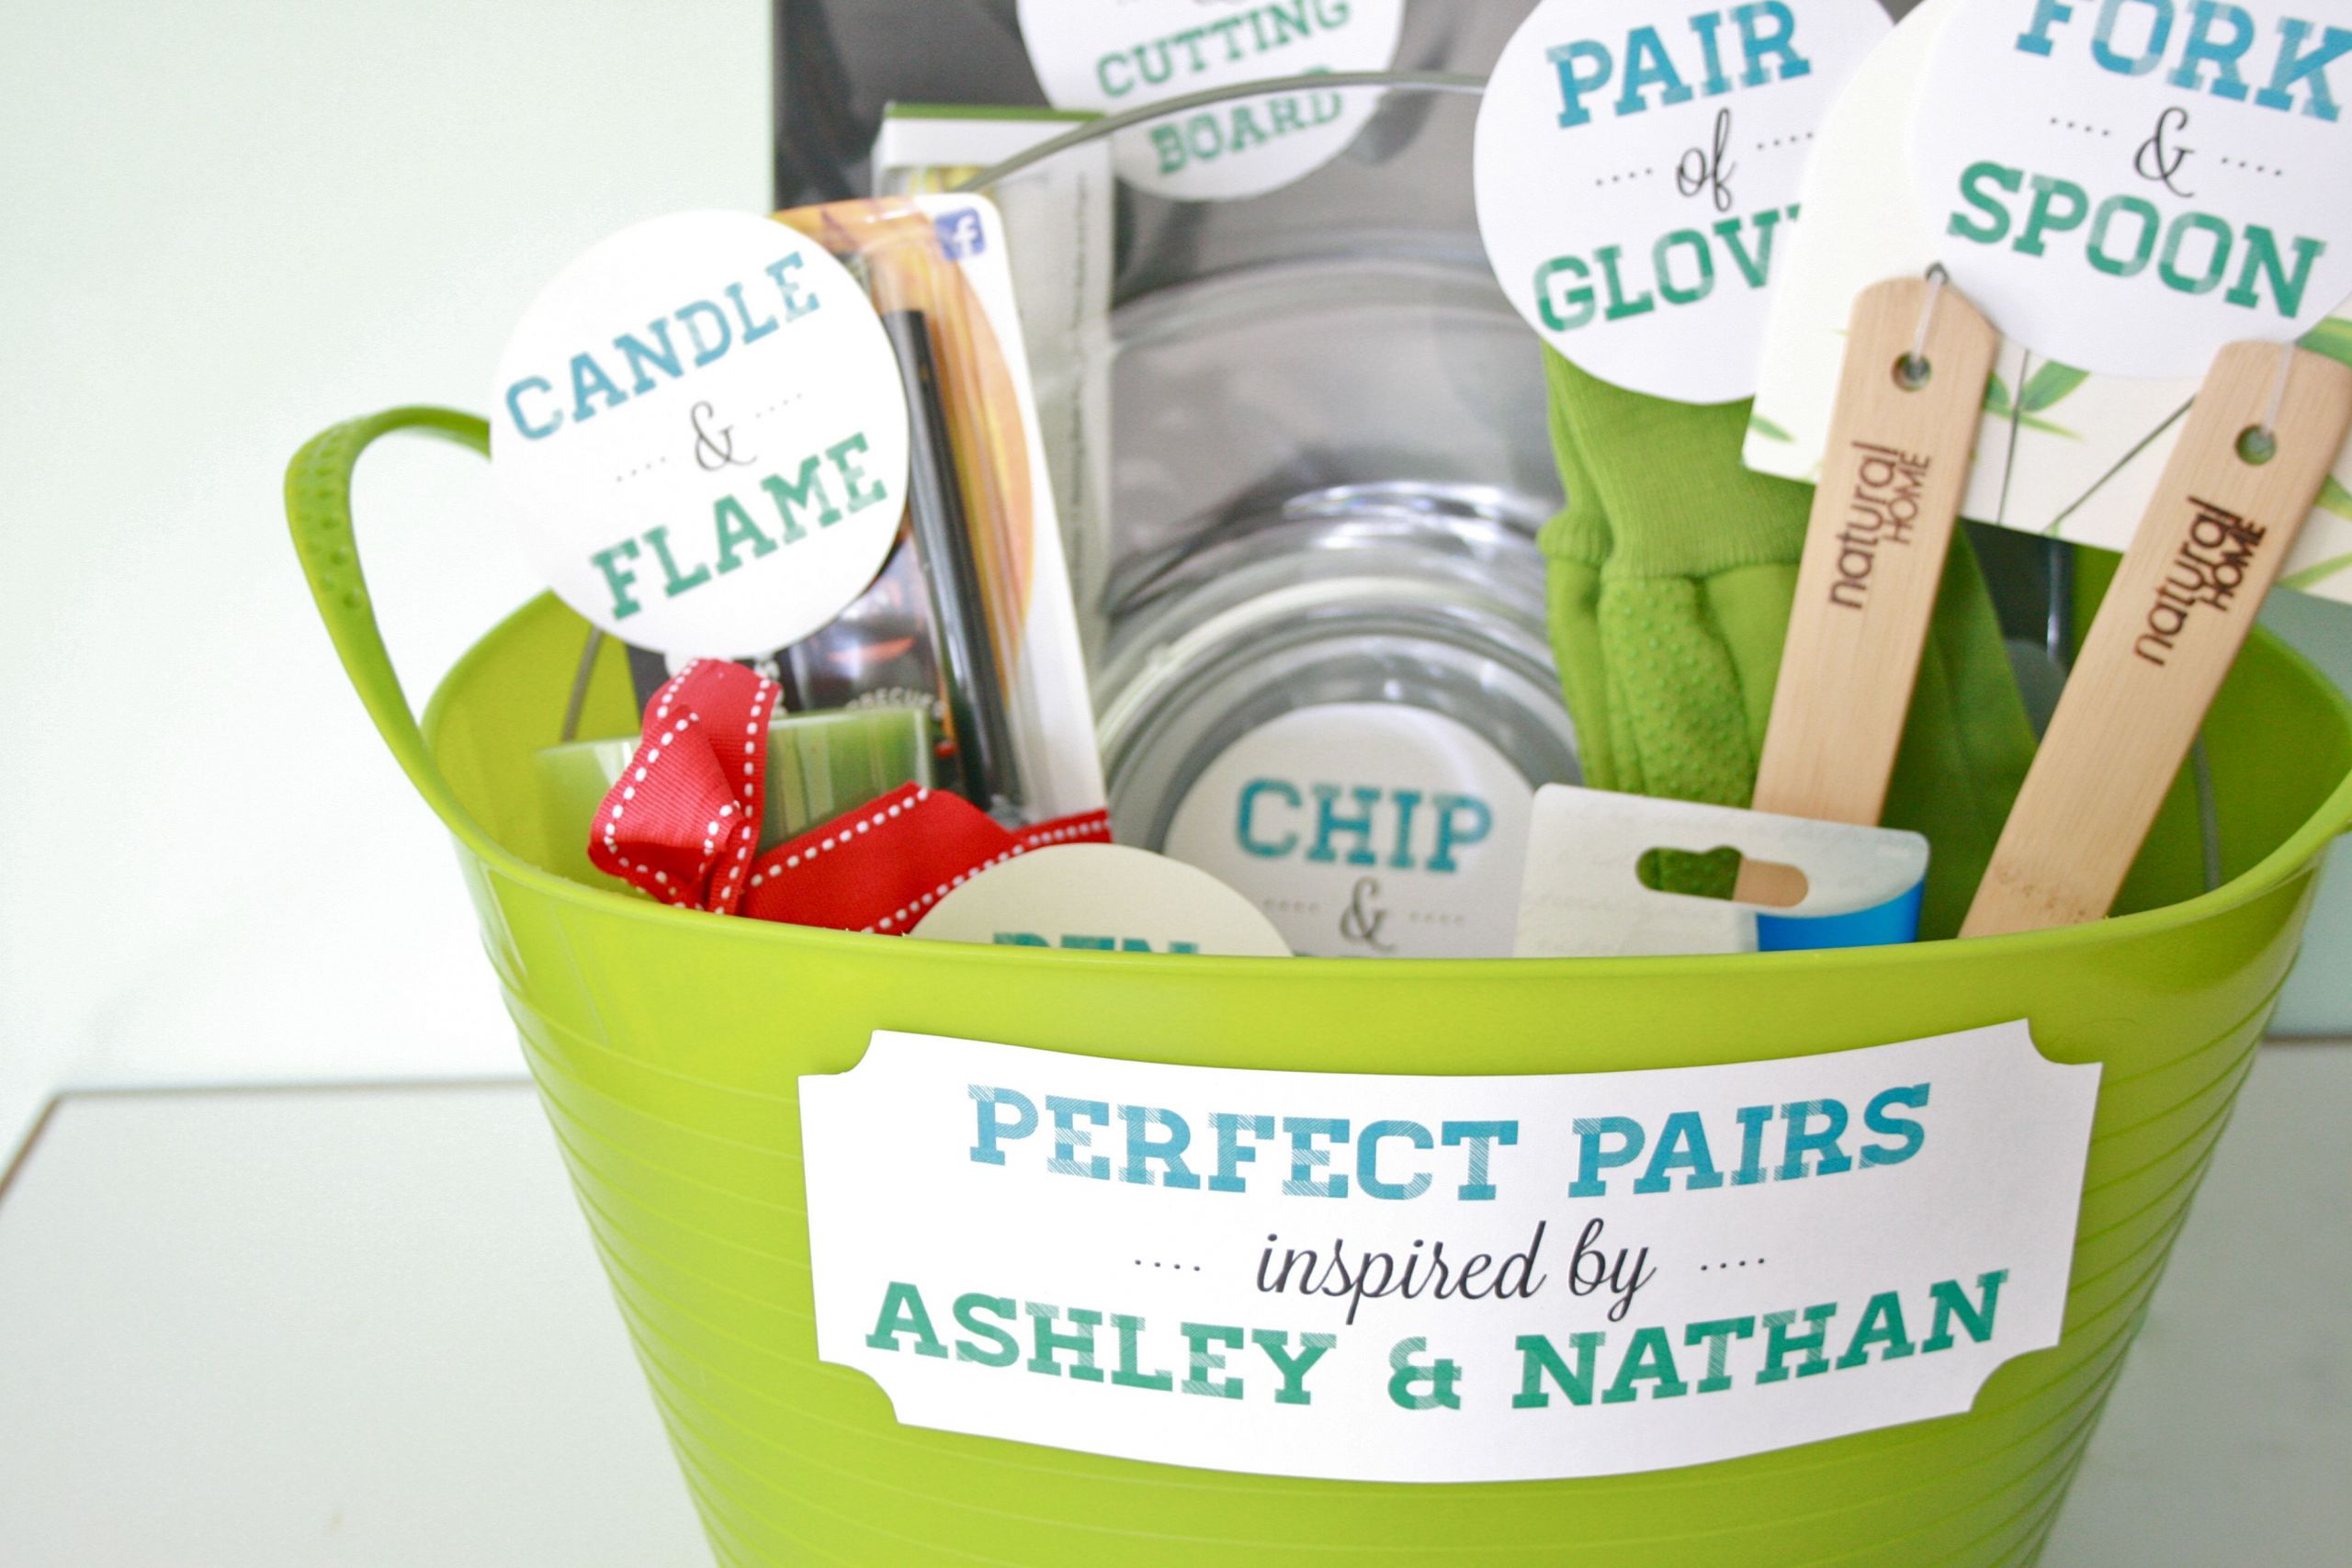 Wedding Shower Gift Ideas For Couples
 DIY "Perfect Pairs" Bridal Shower Gift